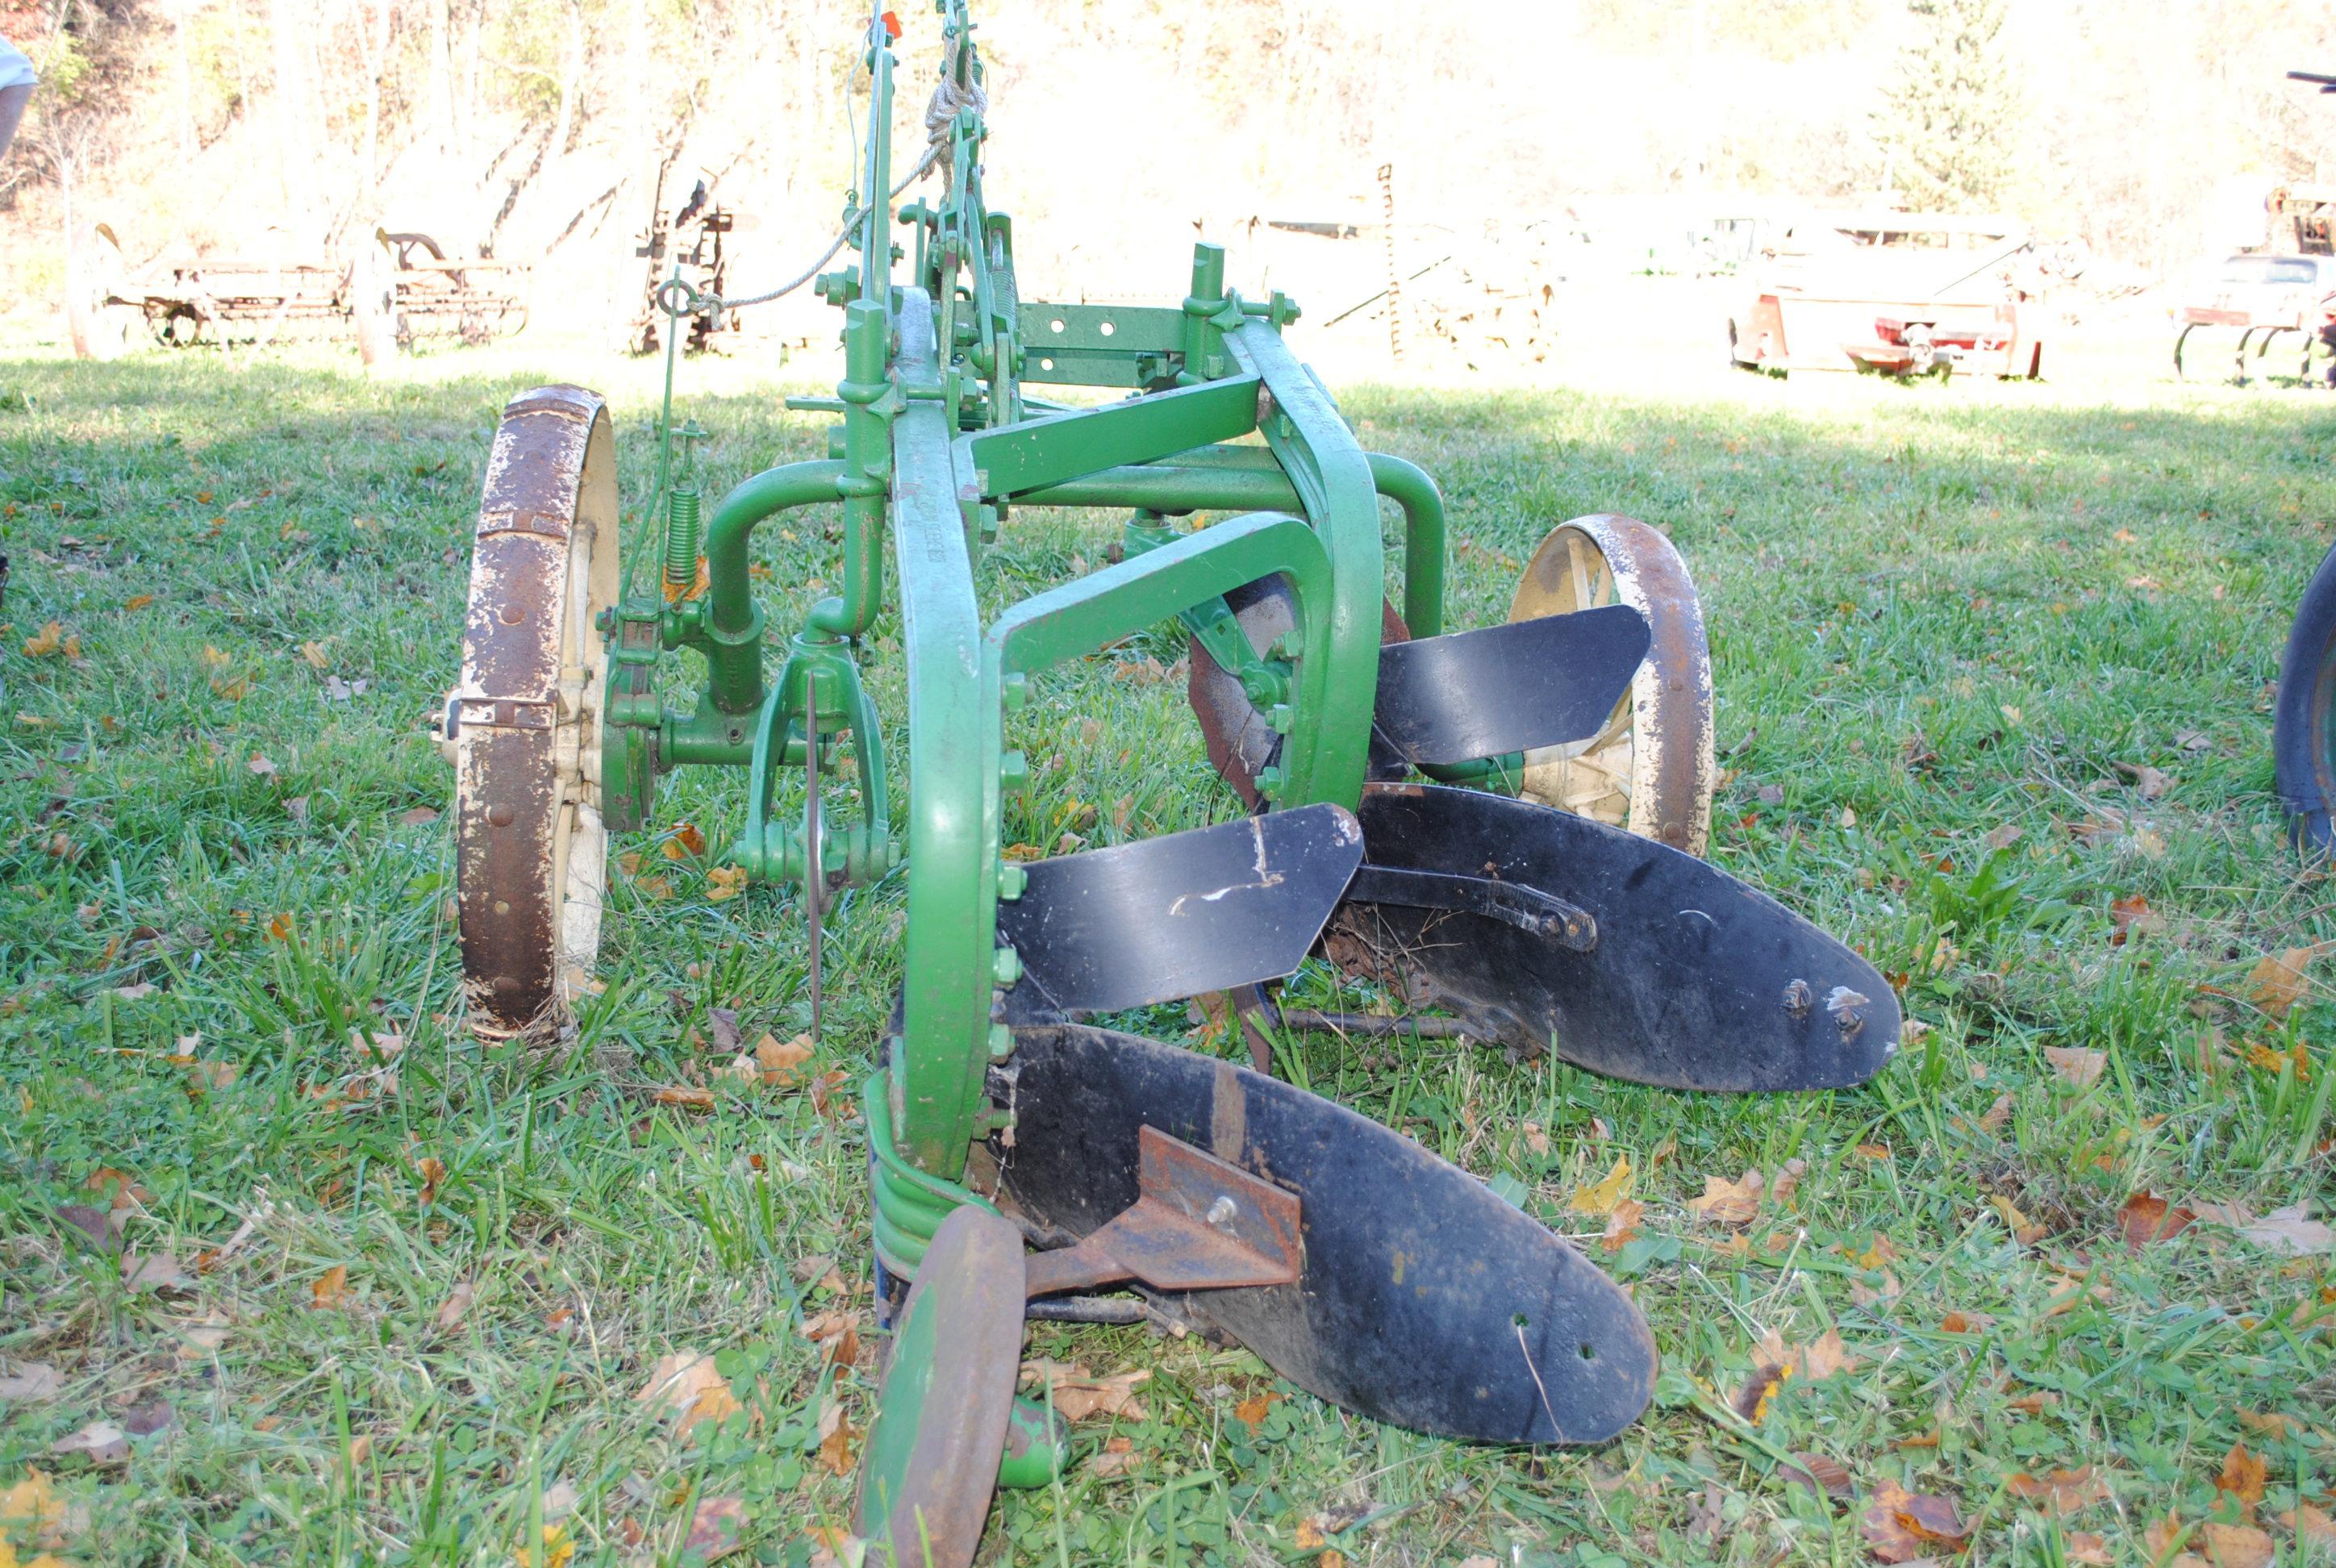 2-16" John Deere 623 plow with coulters, all steel